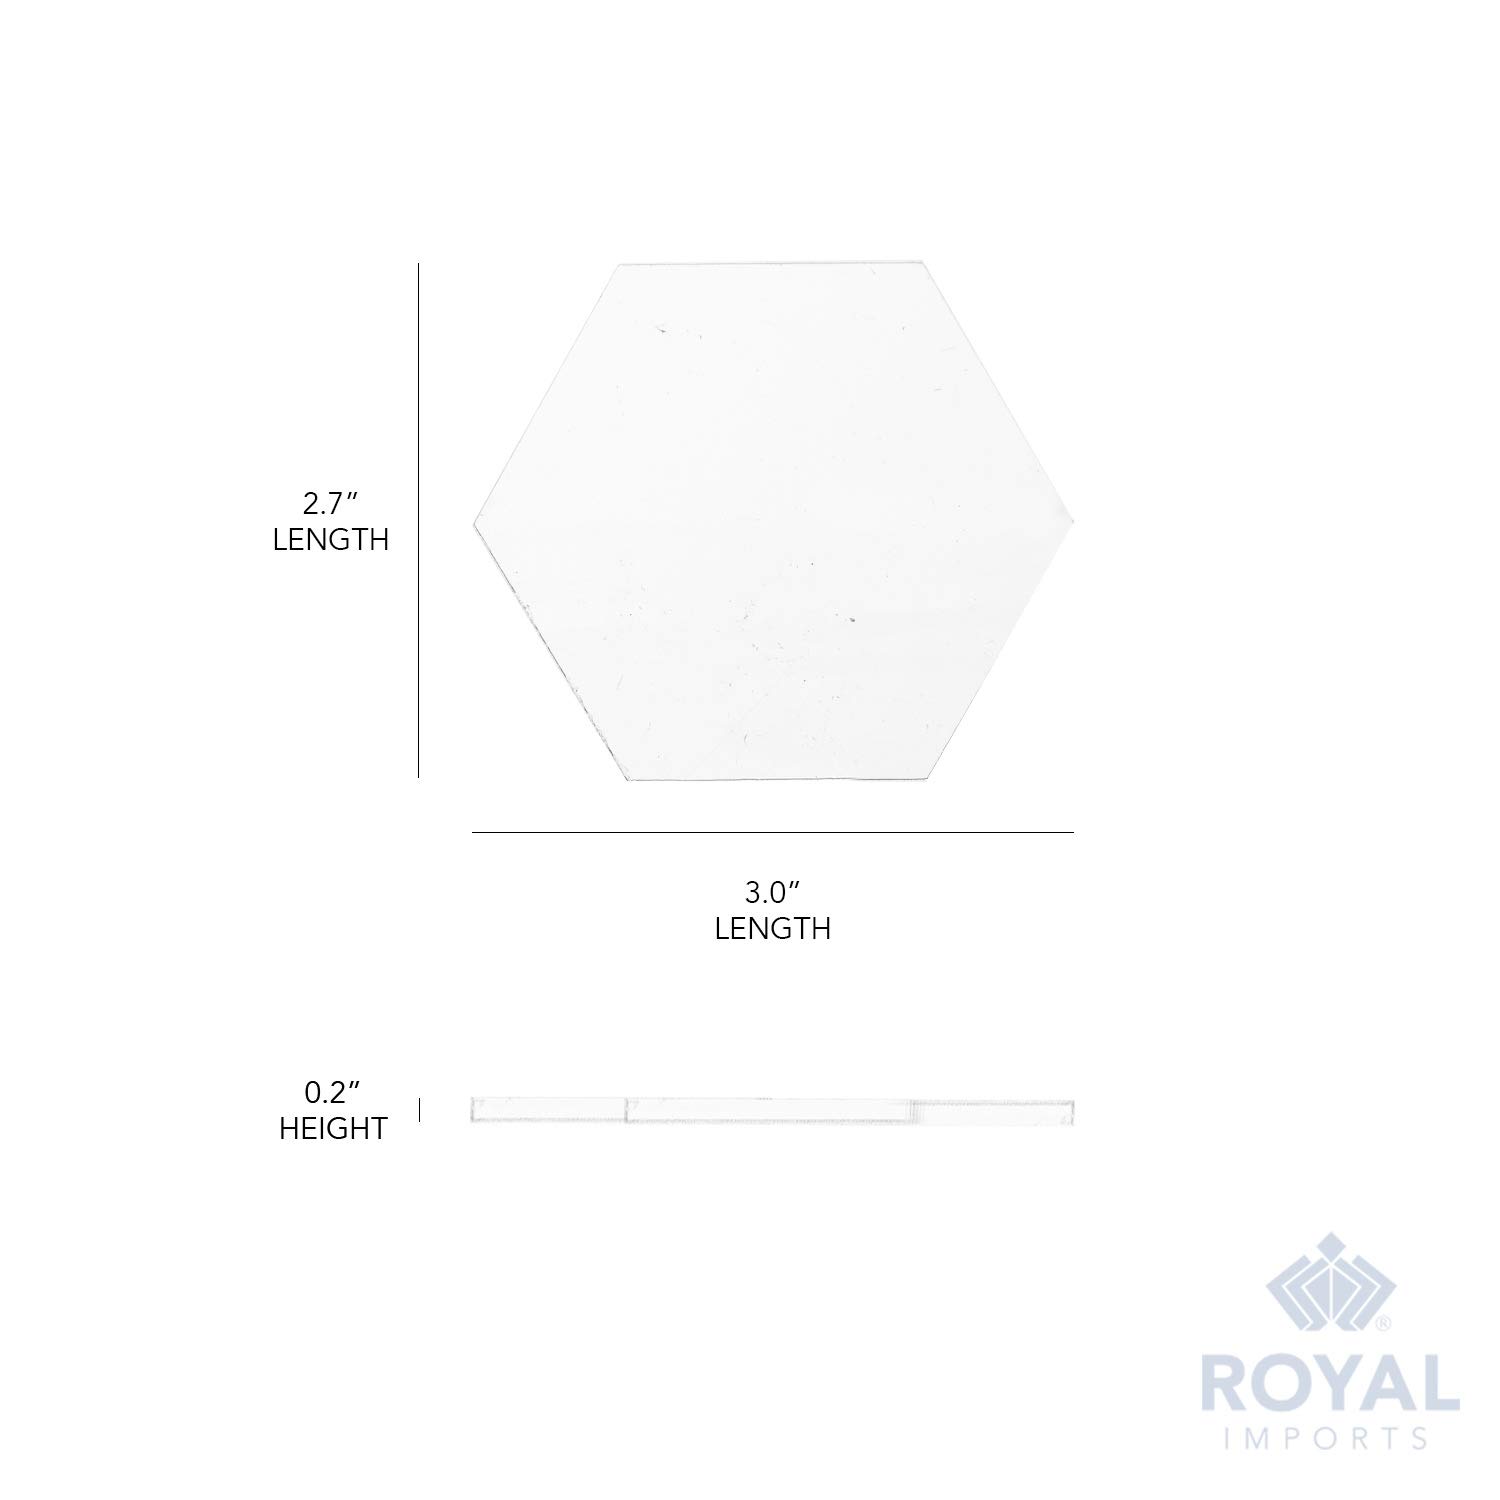 Royal Imports Place Cards Clear Acrylic Blank Plates, Table Seating Number Tiles, Custom Setting DIY Guest Name Signs Decor, Wedding, Reception, Party, Banquet, Dinner, Birthday - Hexagon - 20 pcs